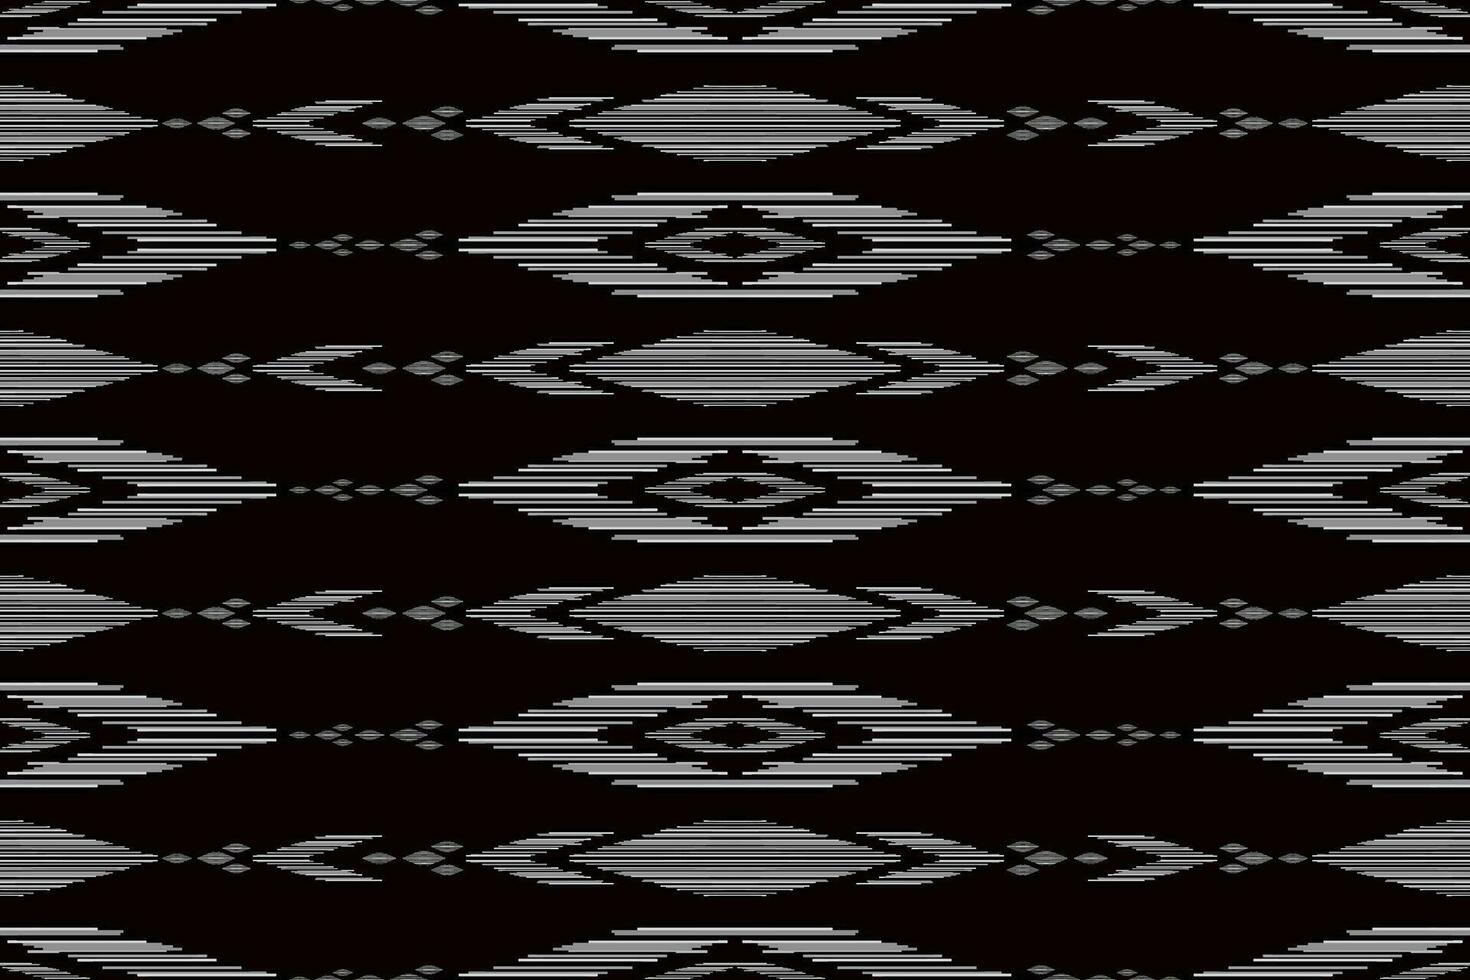 Uzbek ikat pattern and fabric in Uzbekistan. Abstract background for wallpaper, textures, textile, wrapping paper. vector